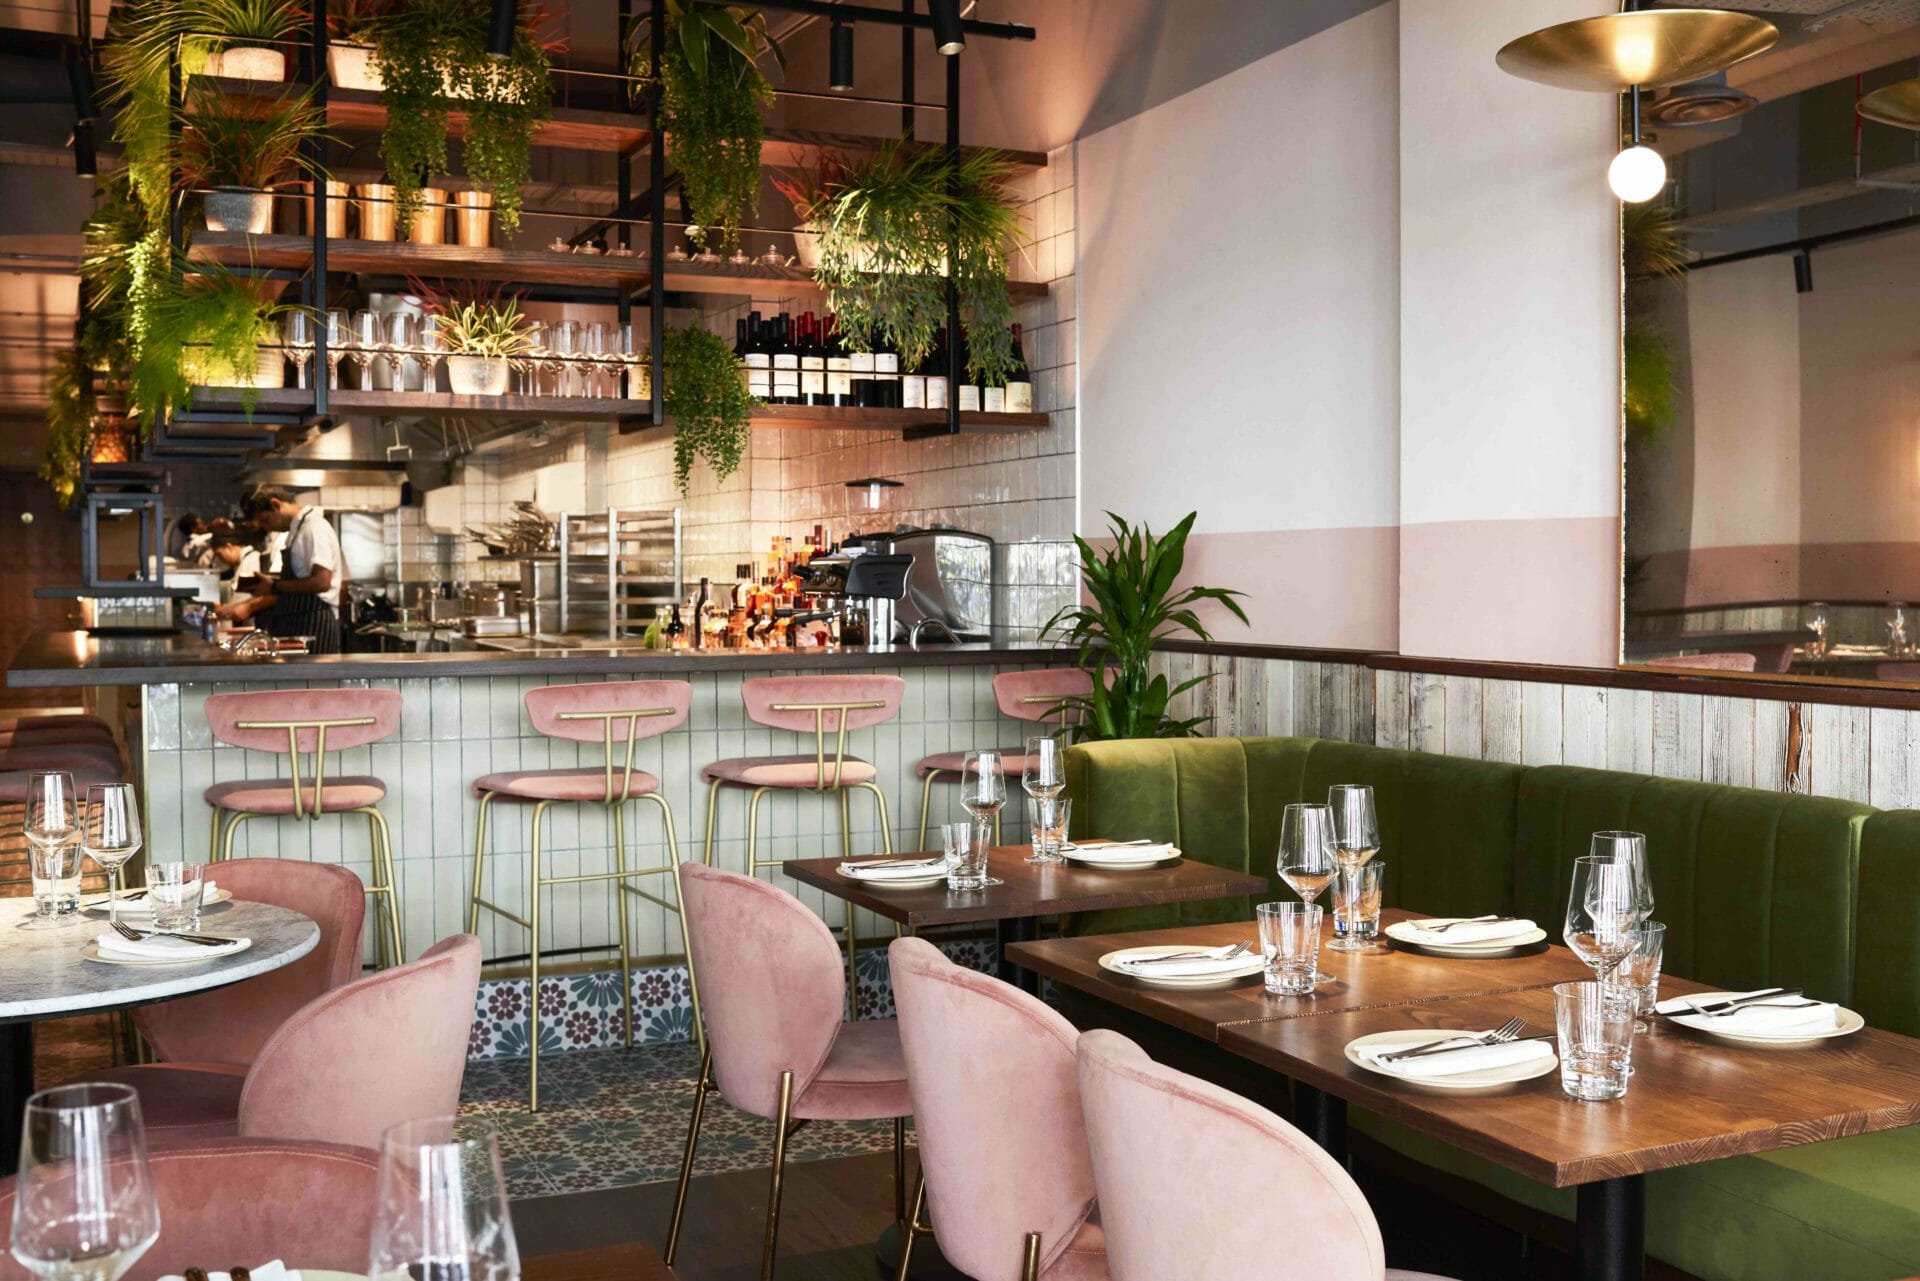 The Best Covent Garden Restaurants 16 Of Its Finest Eateries